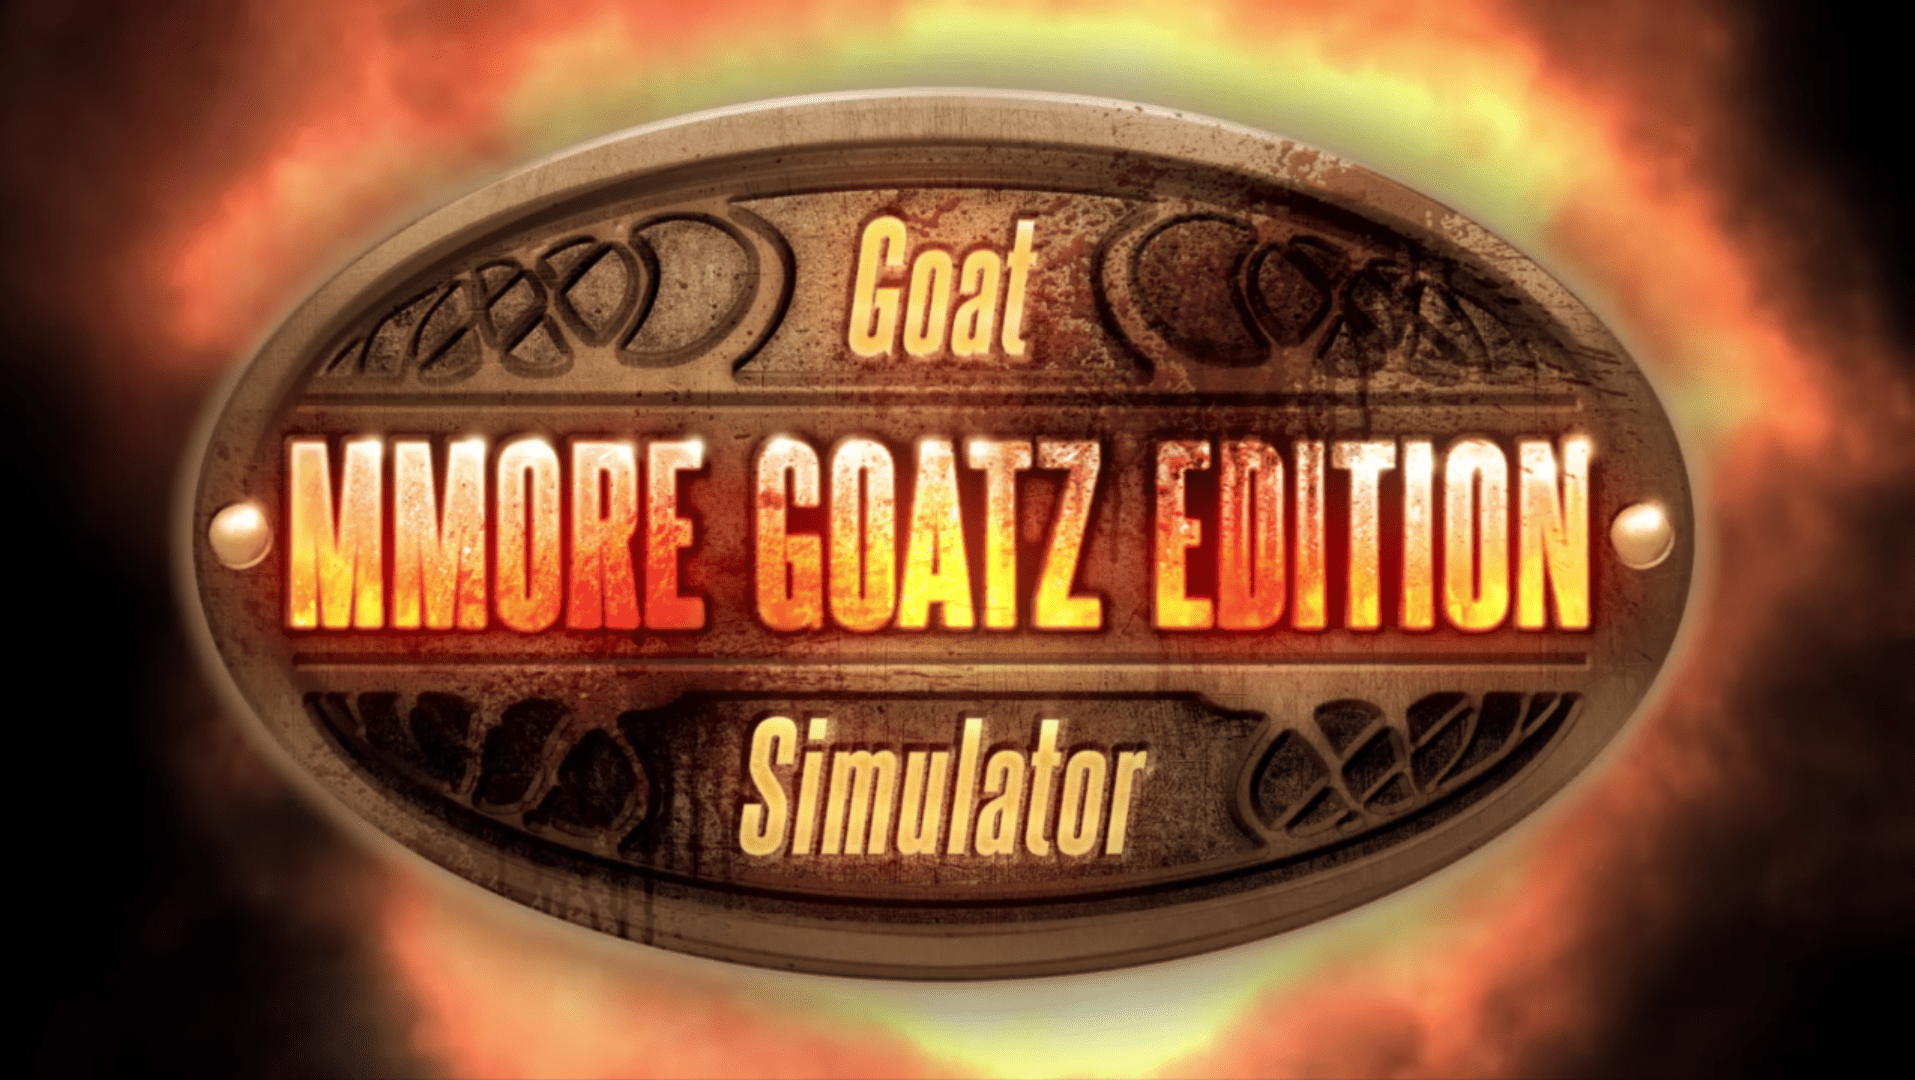 E3 2015: Goat Simulator MMORE GOATZ Edition Is Trampling Xbox This Year